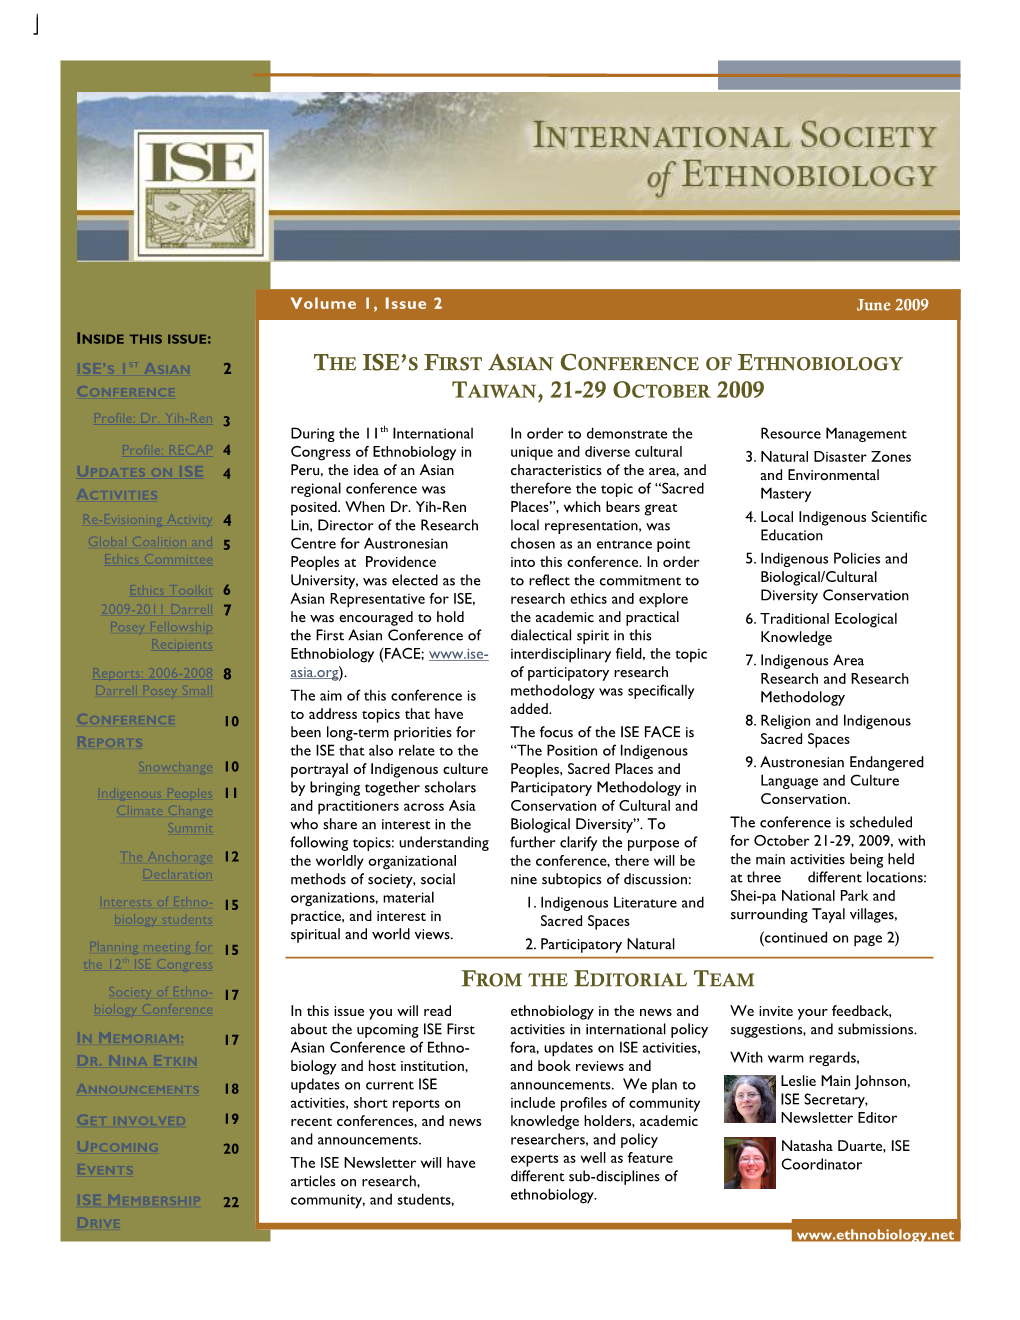 ISE Newsletter, Volume 1 Issue 2, Without Photos